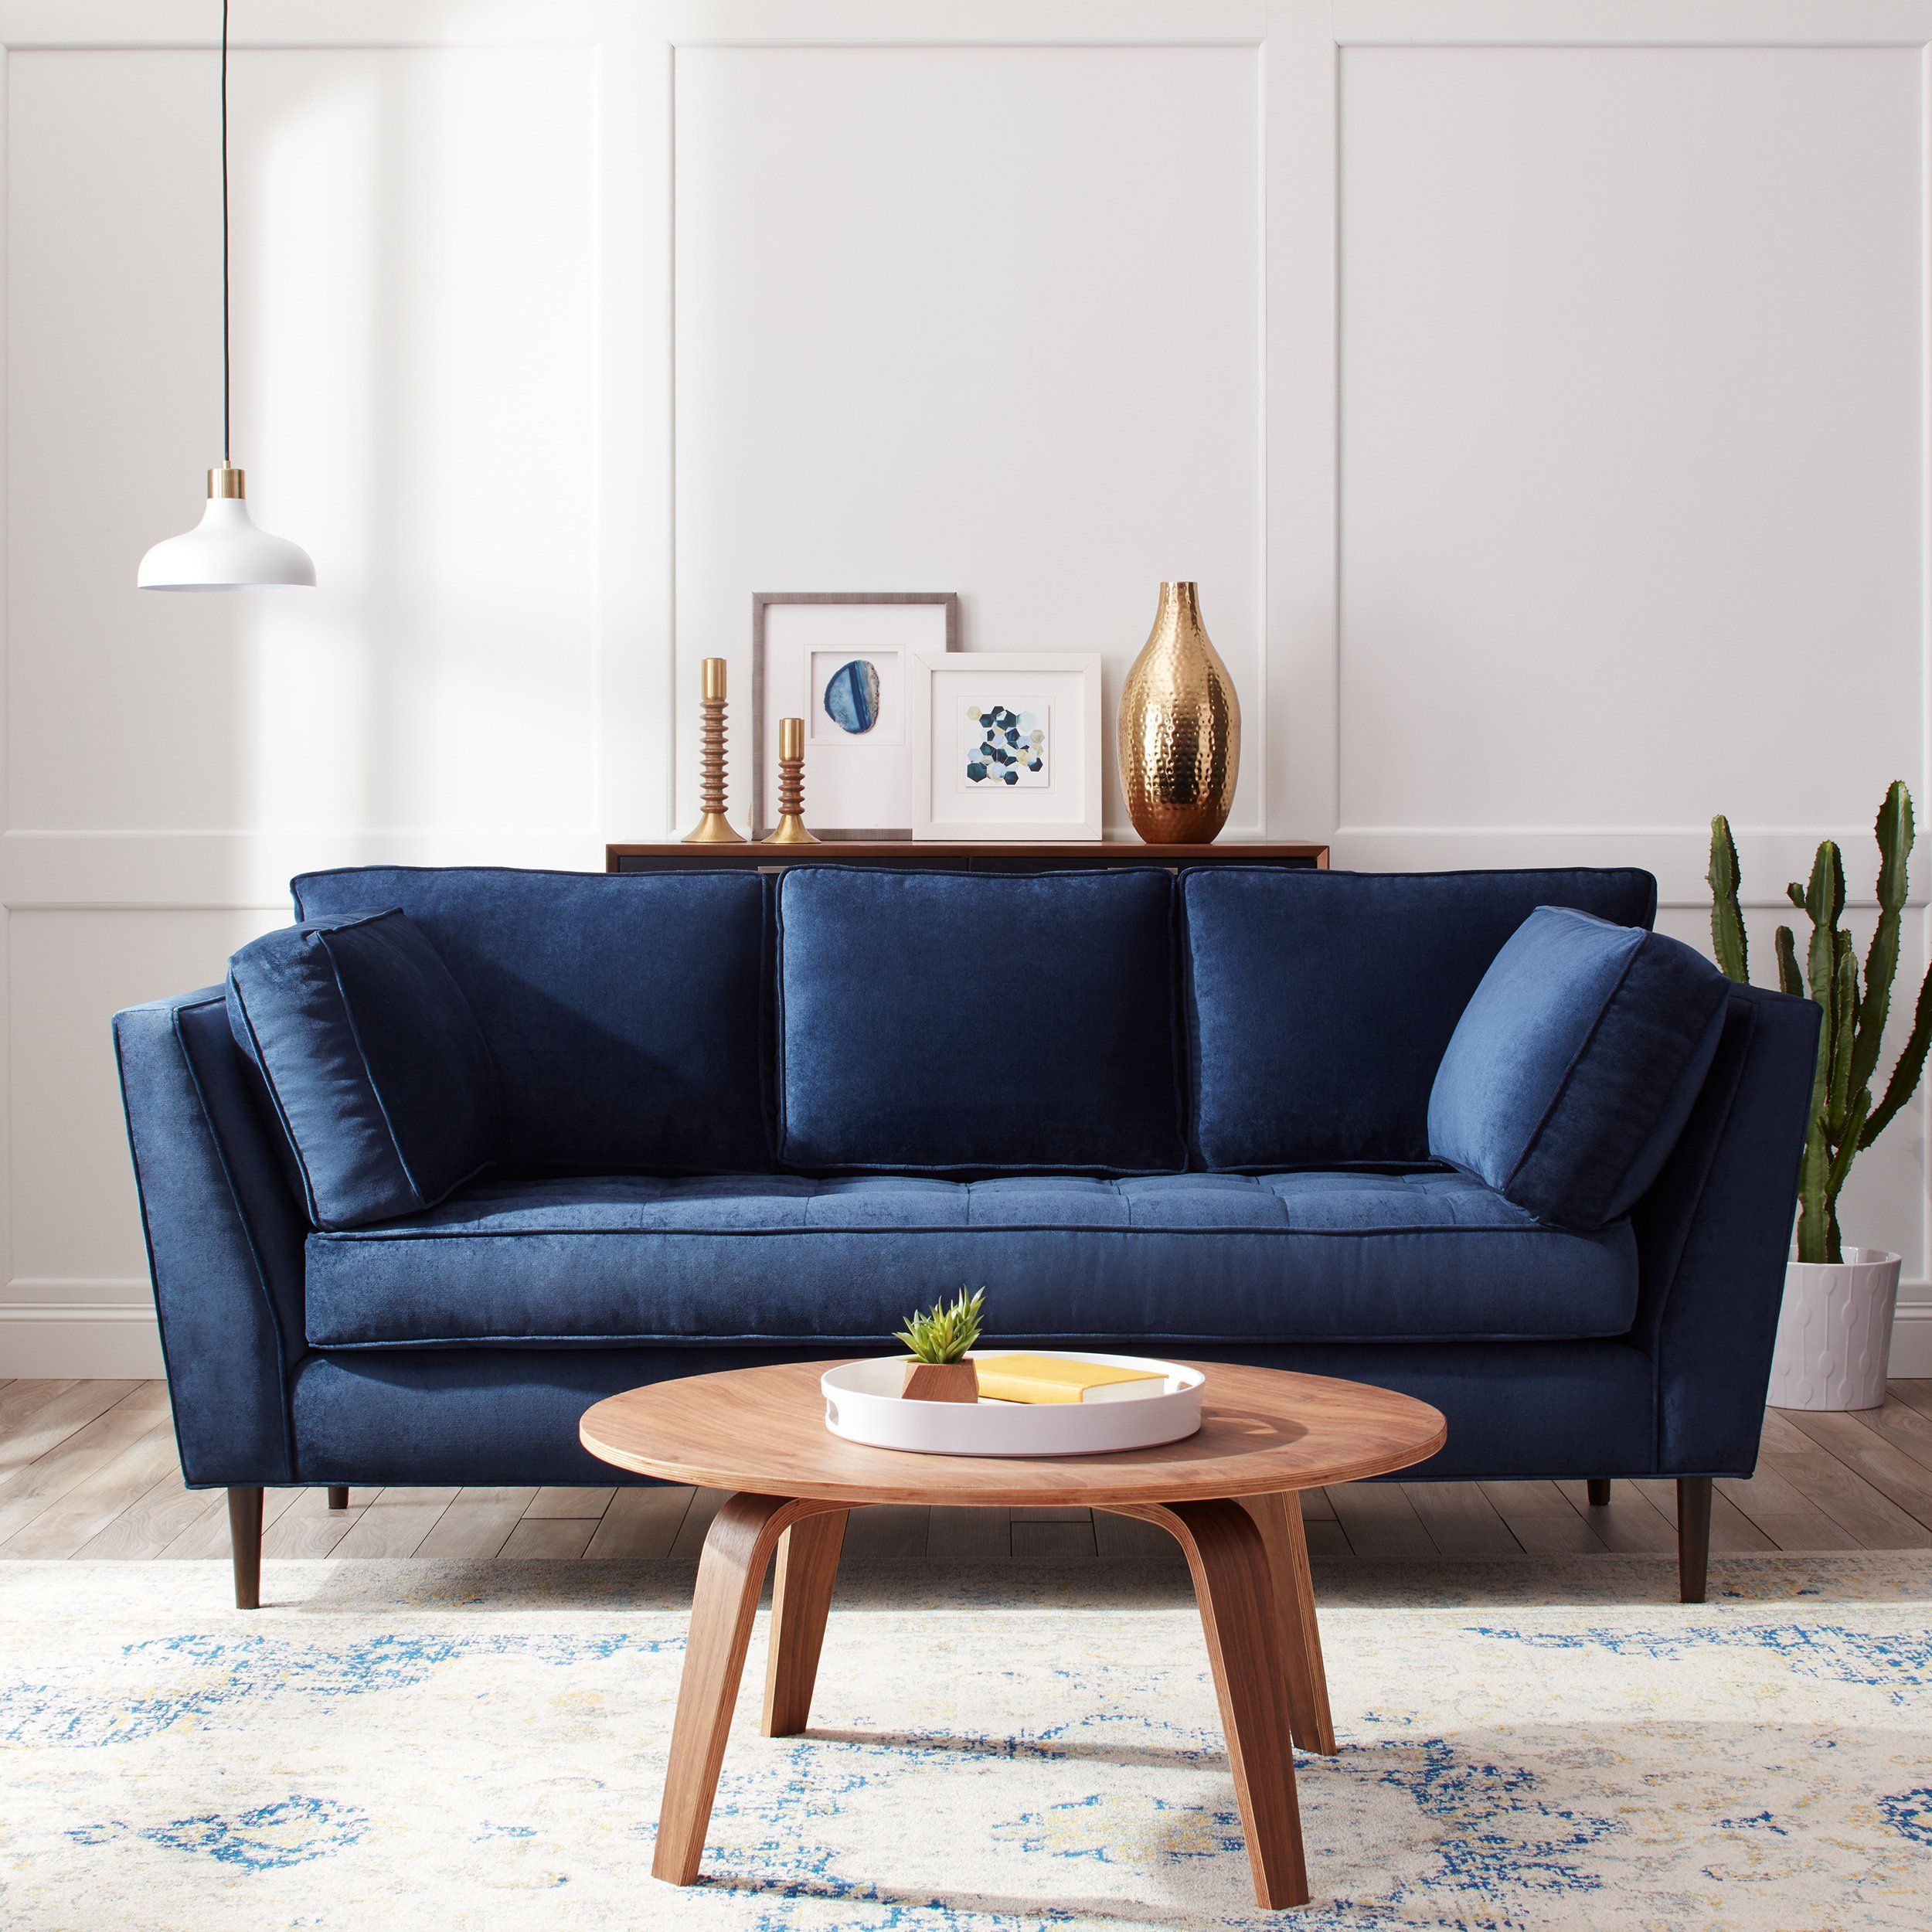 Our Best Living Room Furniture Deals | Blue Sofa Living, Blue Couch In Sofas In Blue (Gallery 2 of 20)